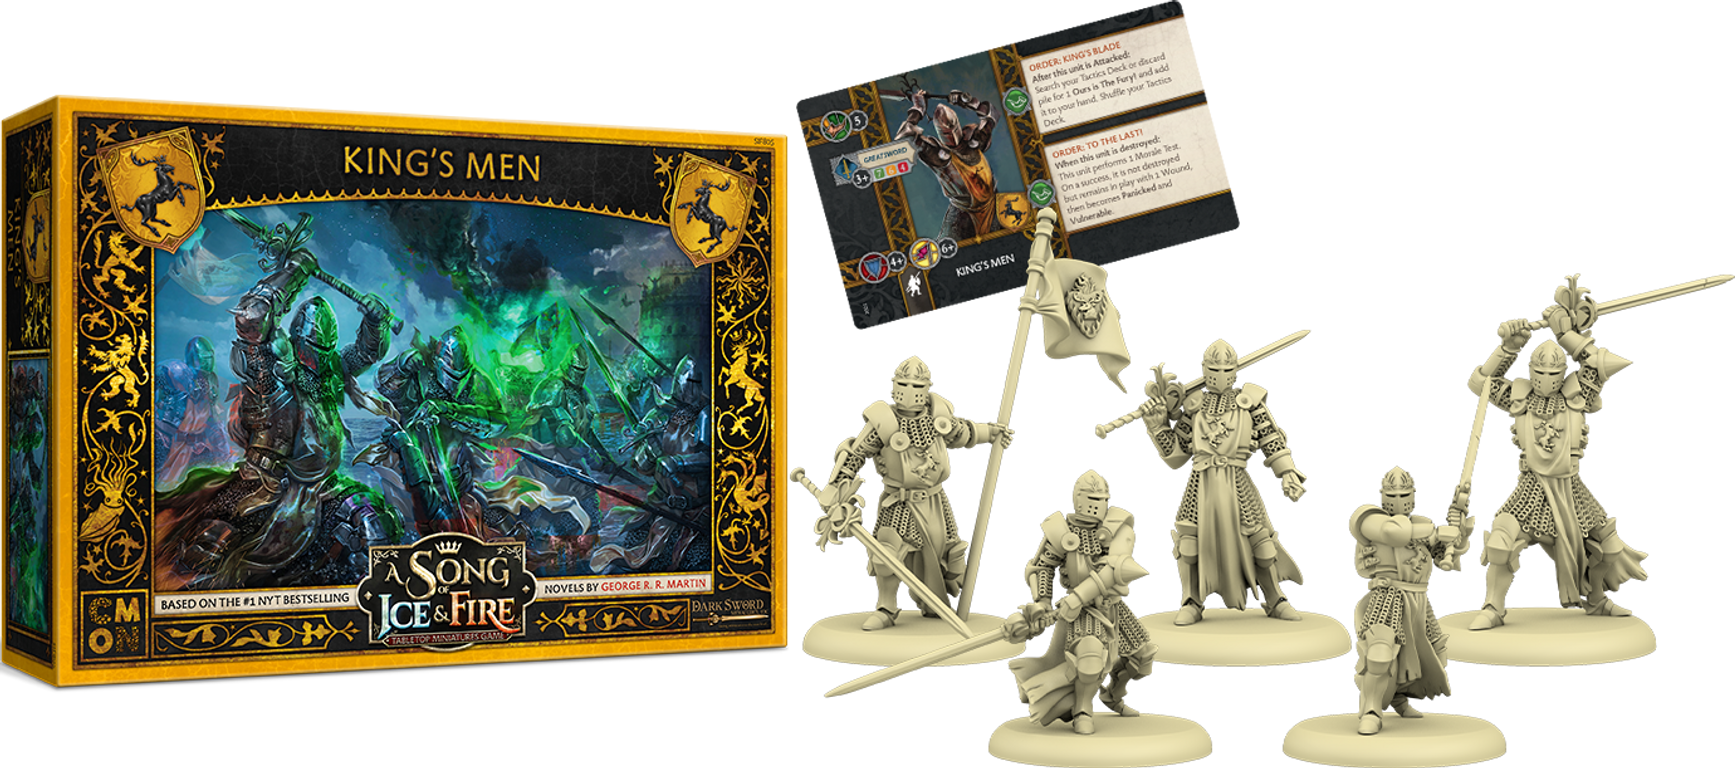 A Song of Ice & Fire: Tabletop Miniatures Game – King's Men partes